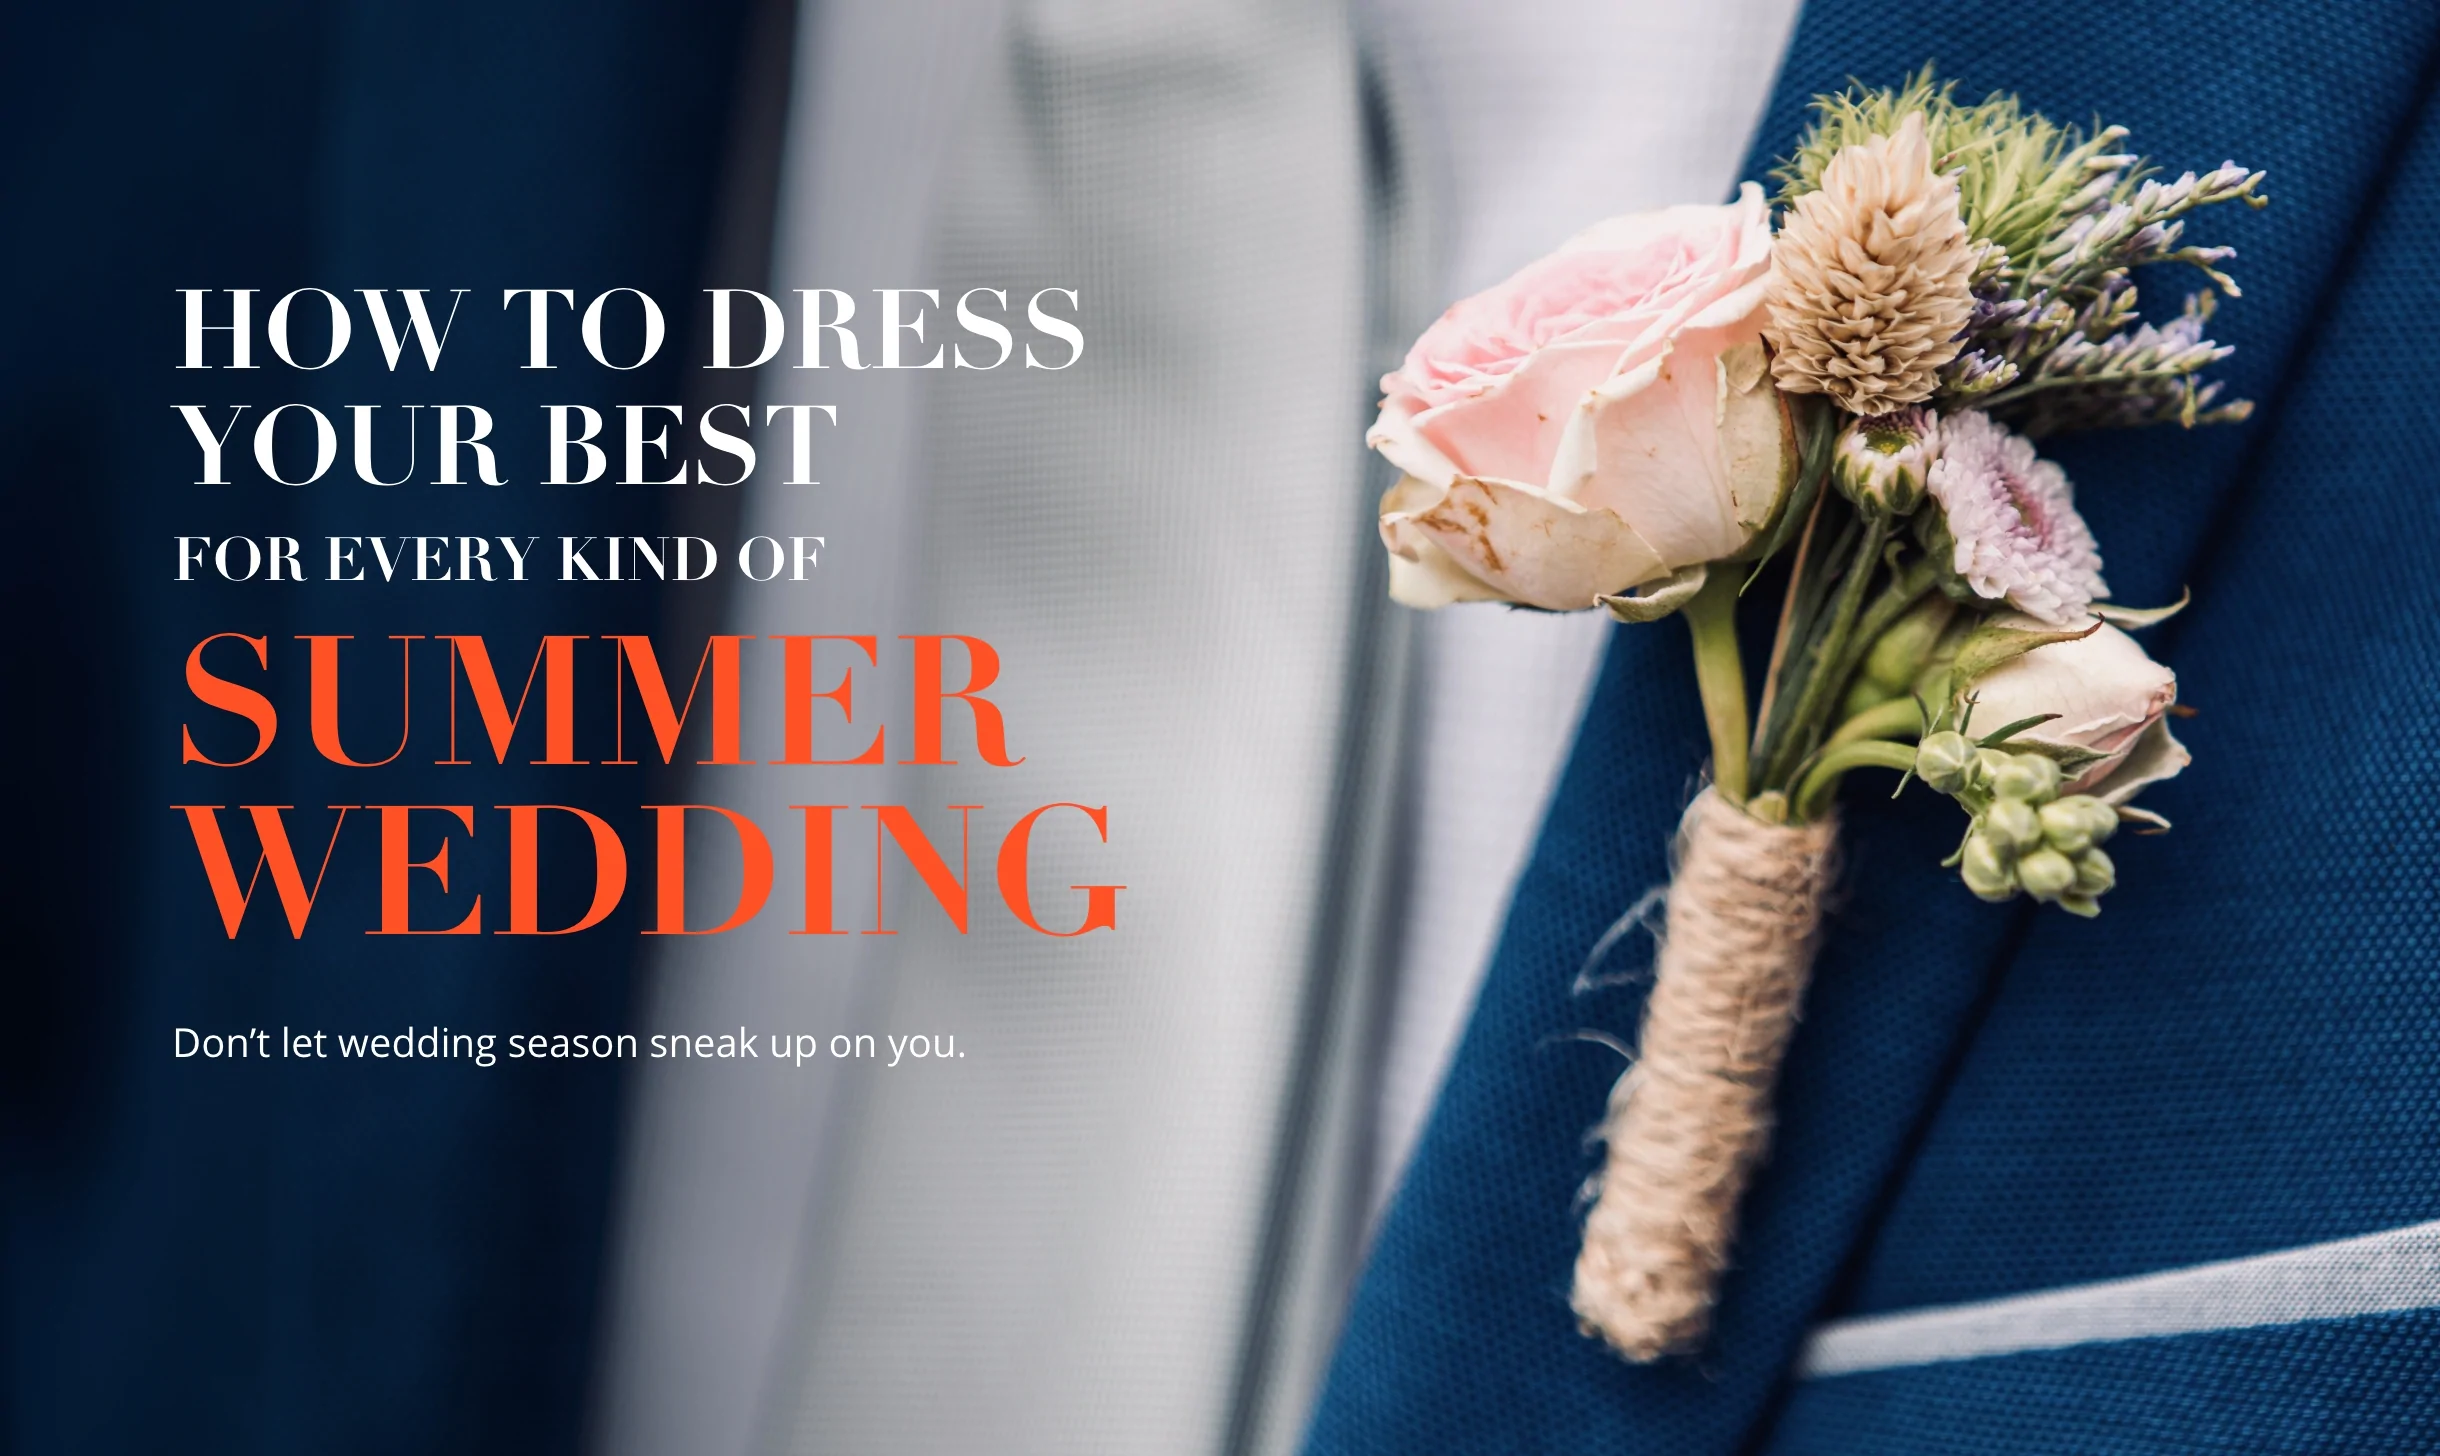 How to Dress Your Best for Every Kind of Summer Wedding